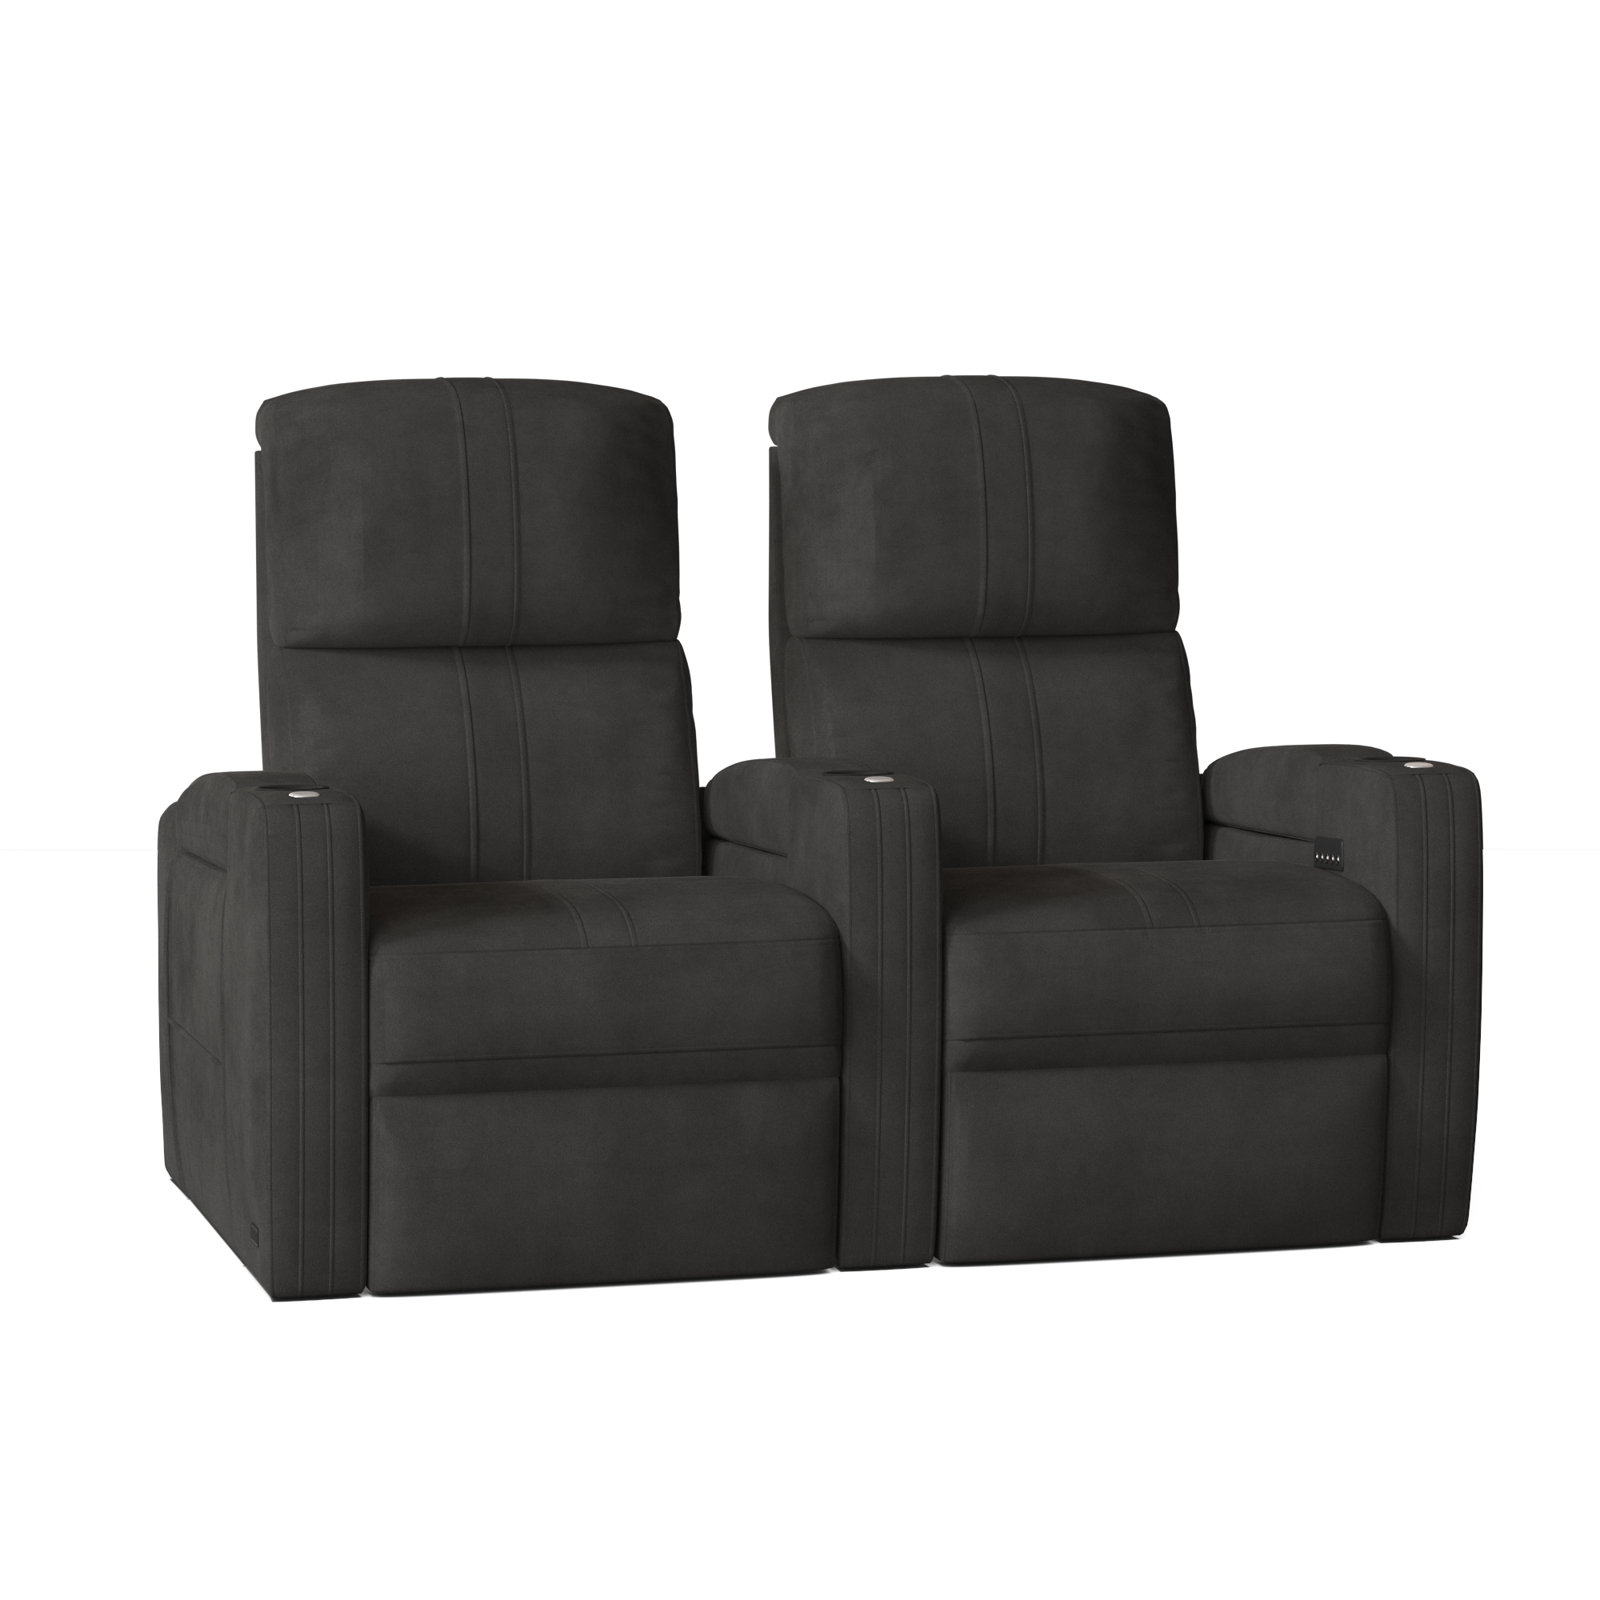 Winston Porter Flash HR Series 63.75'' Wide Home Theater Seating with Cup Holder